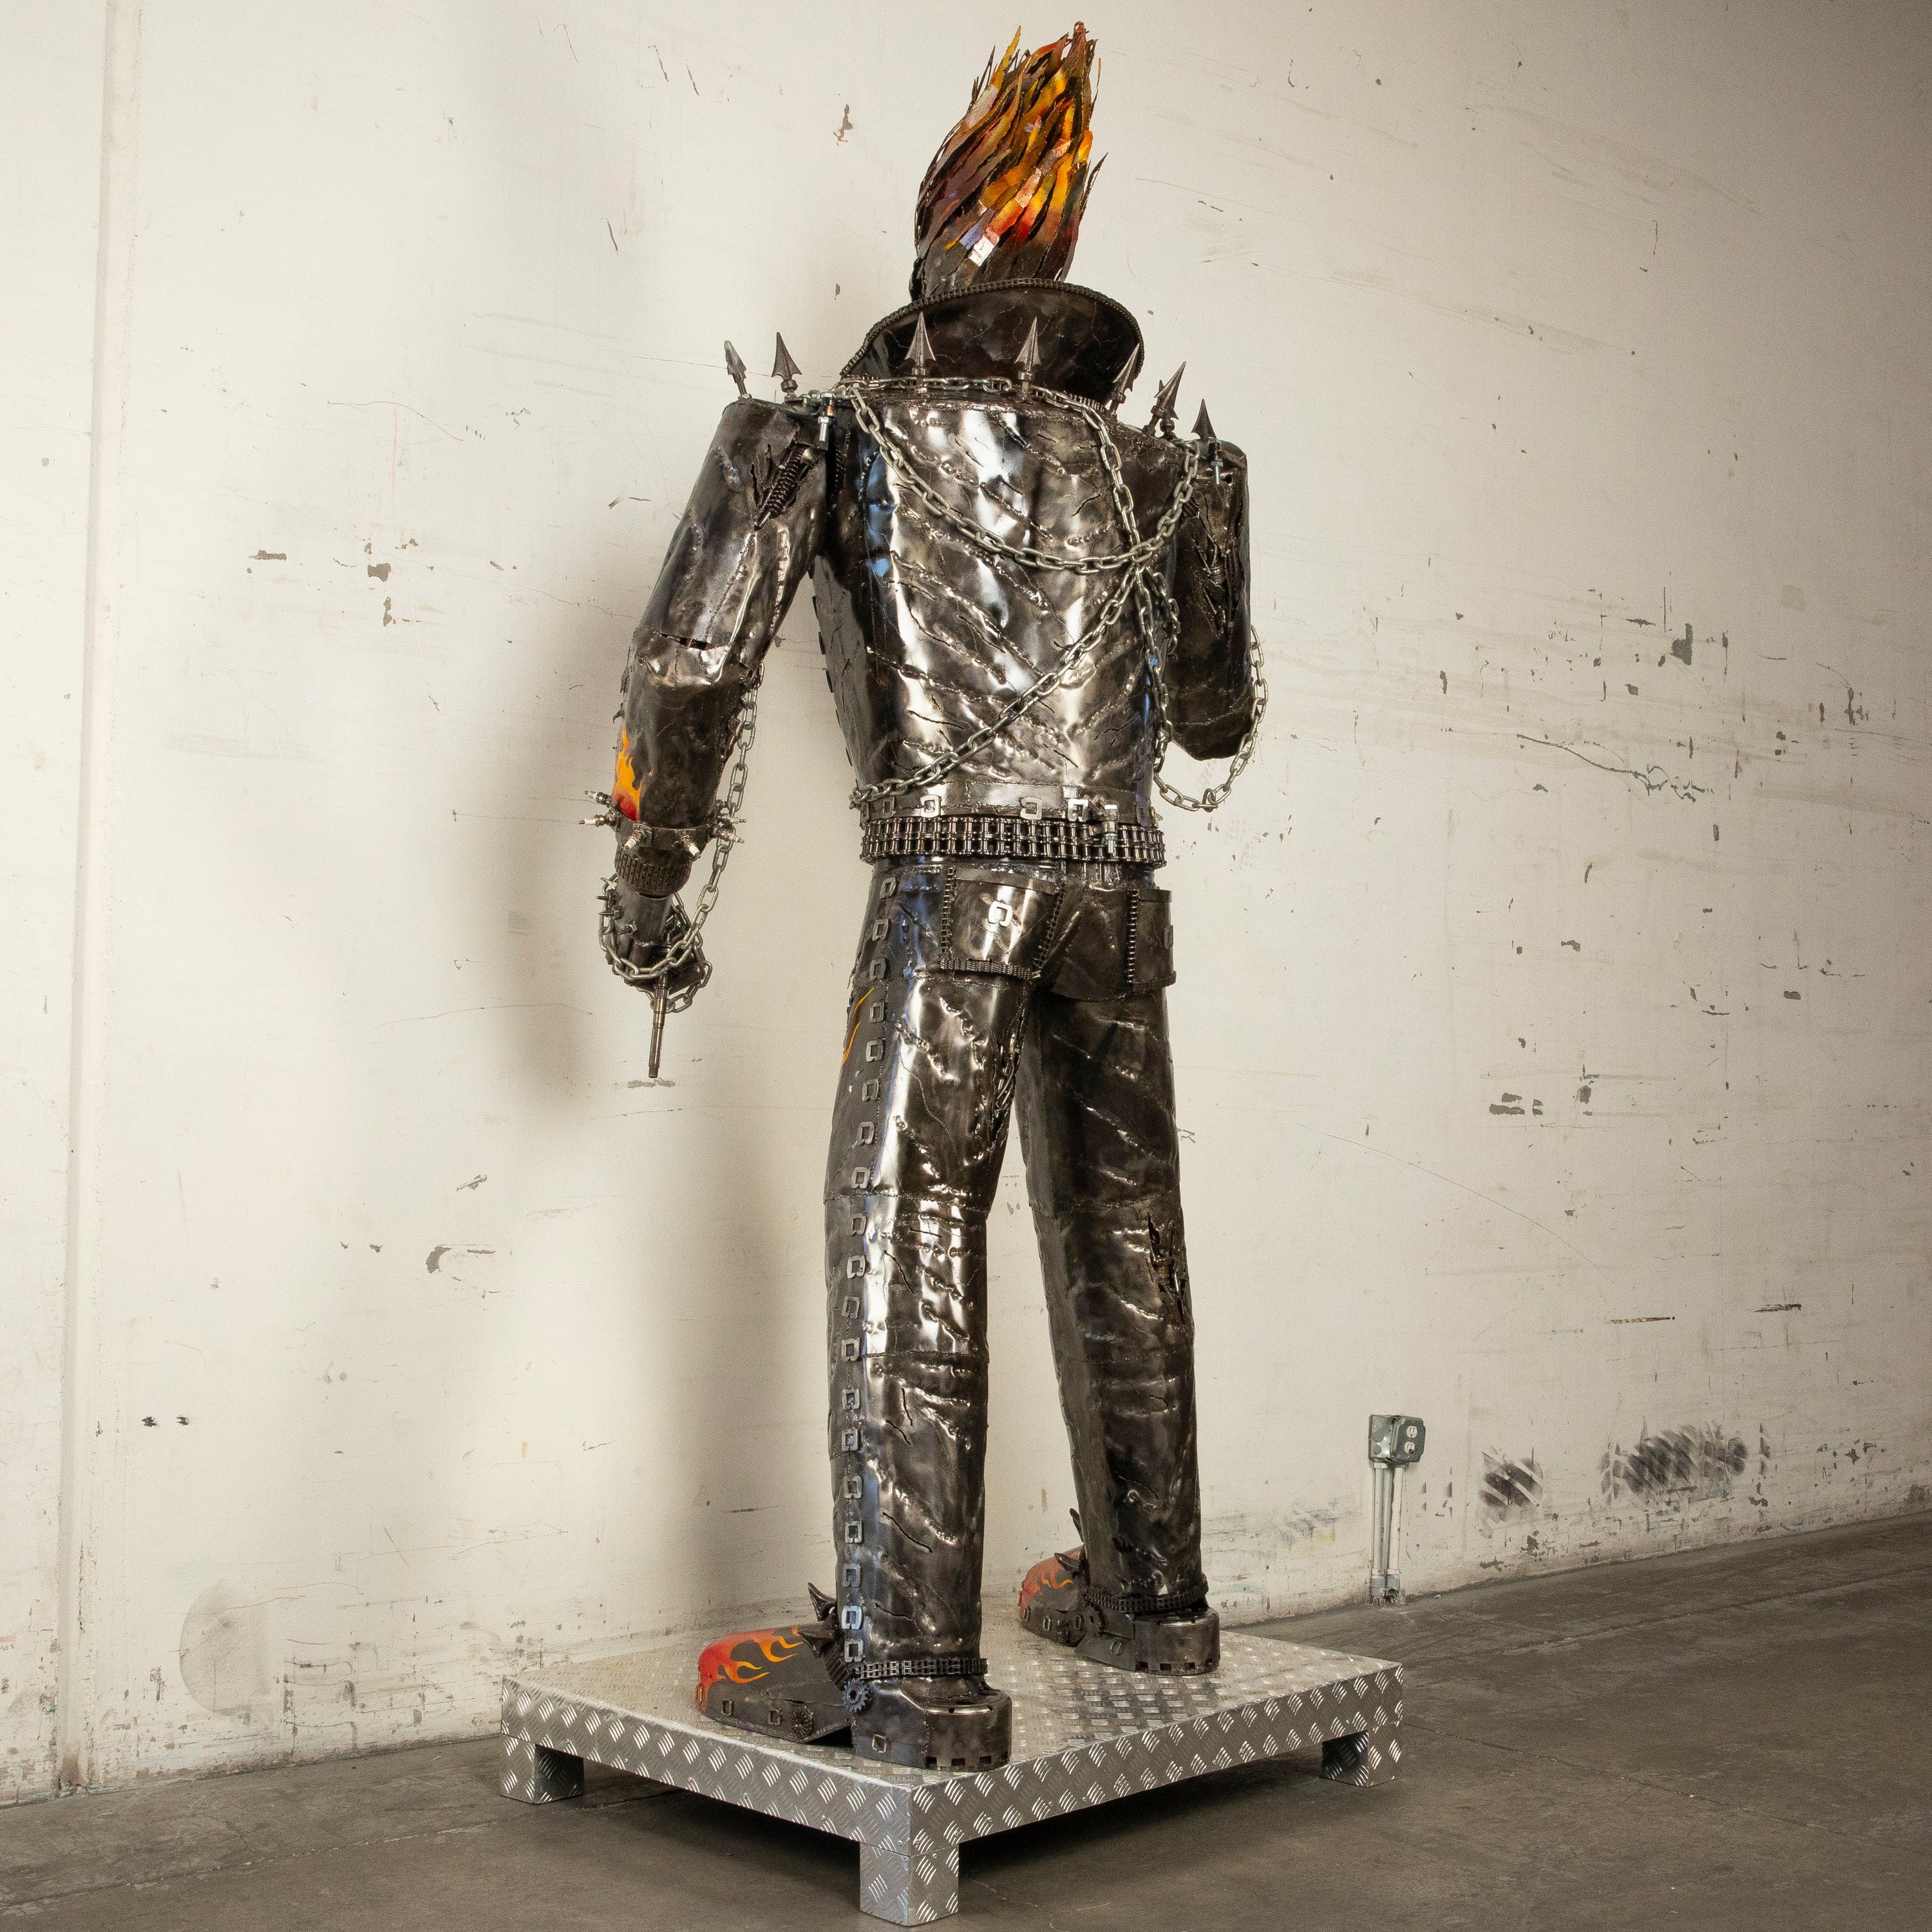 Kalifano Recycled Metal Art 102" Ghost Rider Inspired Recycled Metal Art Sculpture RMS-GR260-S01